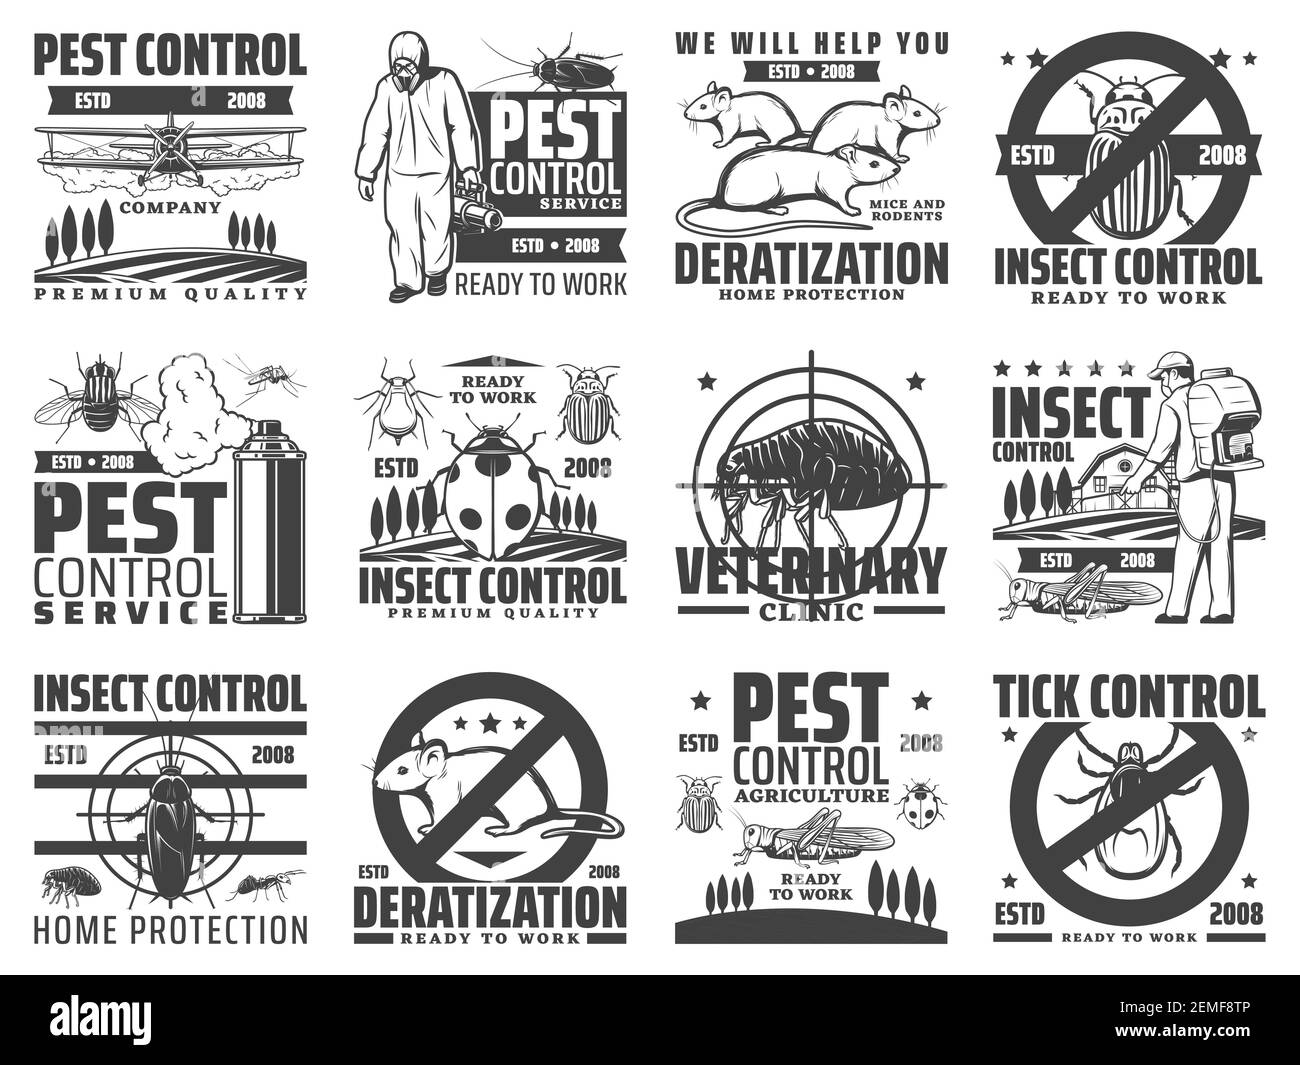 Pest control service, rodents and insects extermination icons. Deratization, insects extermination and agricultural pest control with pesticide dustin Stock Vector